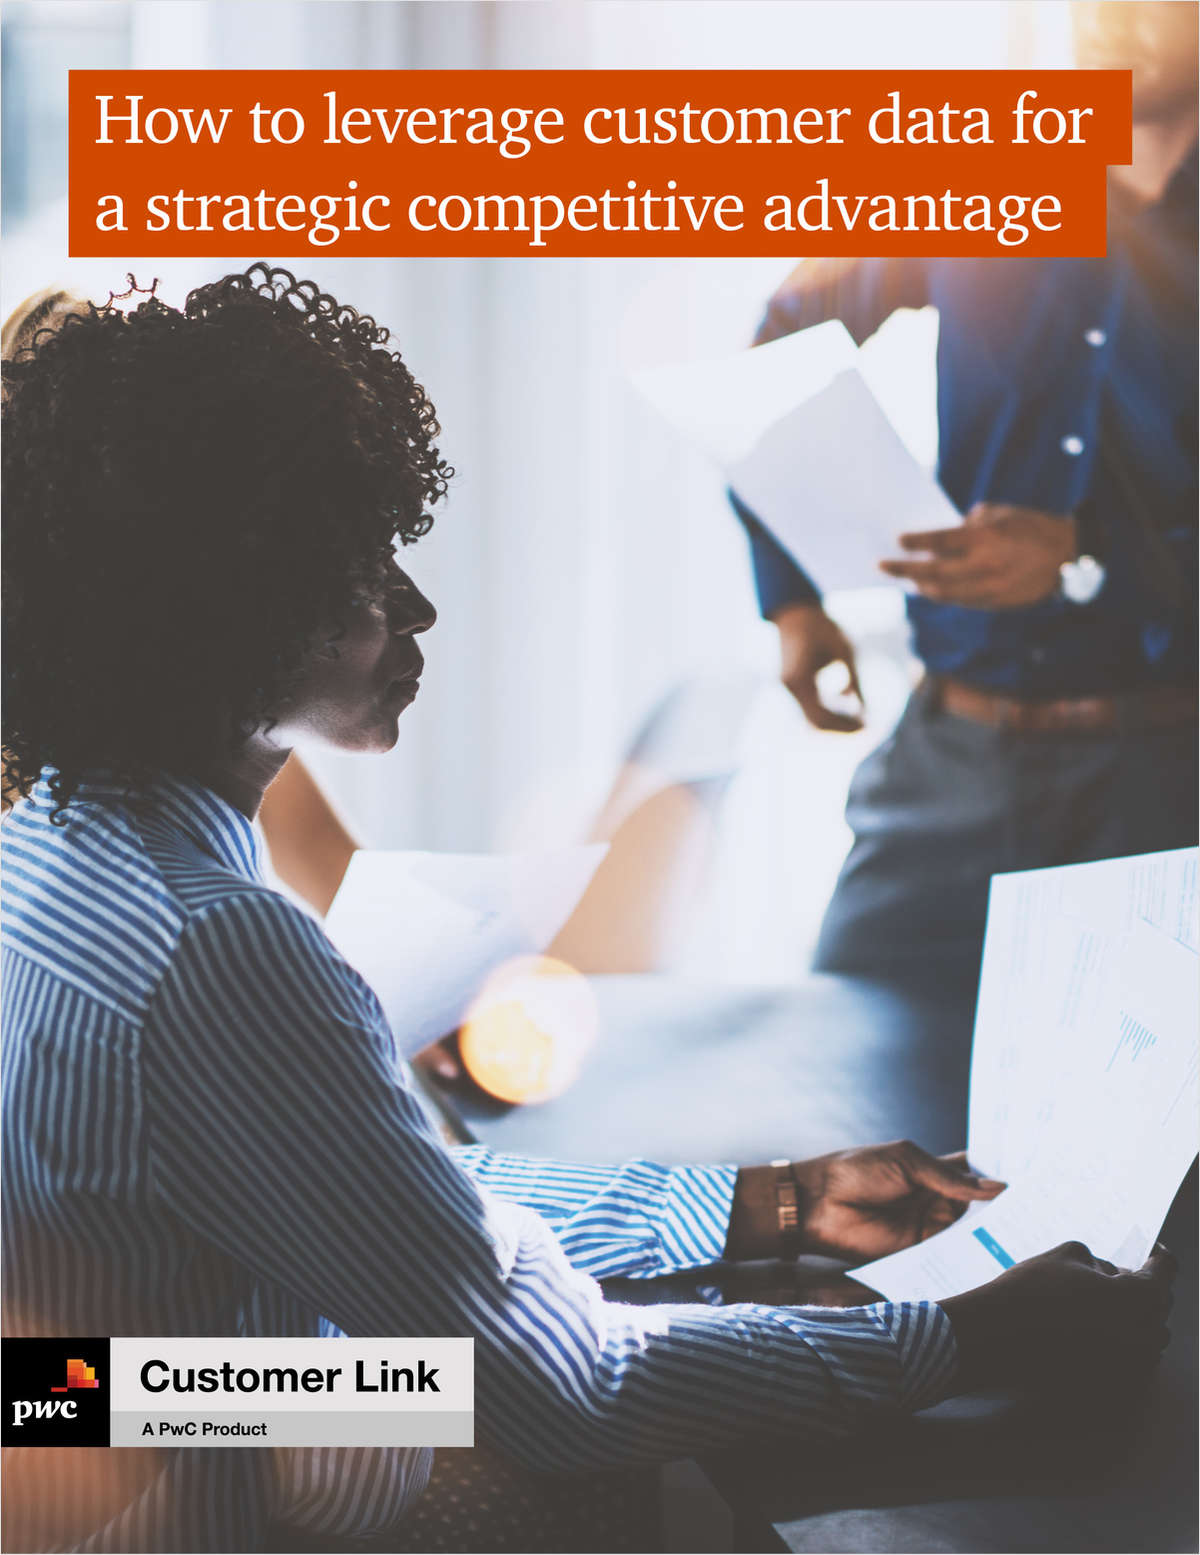 How to Leverage Customer Data for a Strategic Competitive Advantage